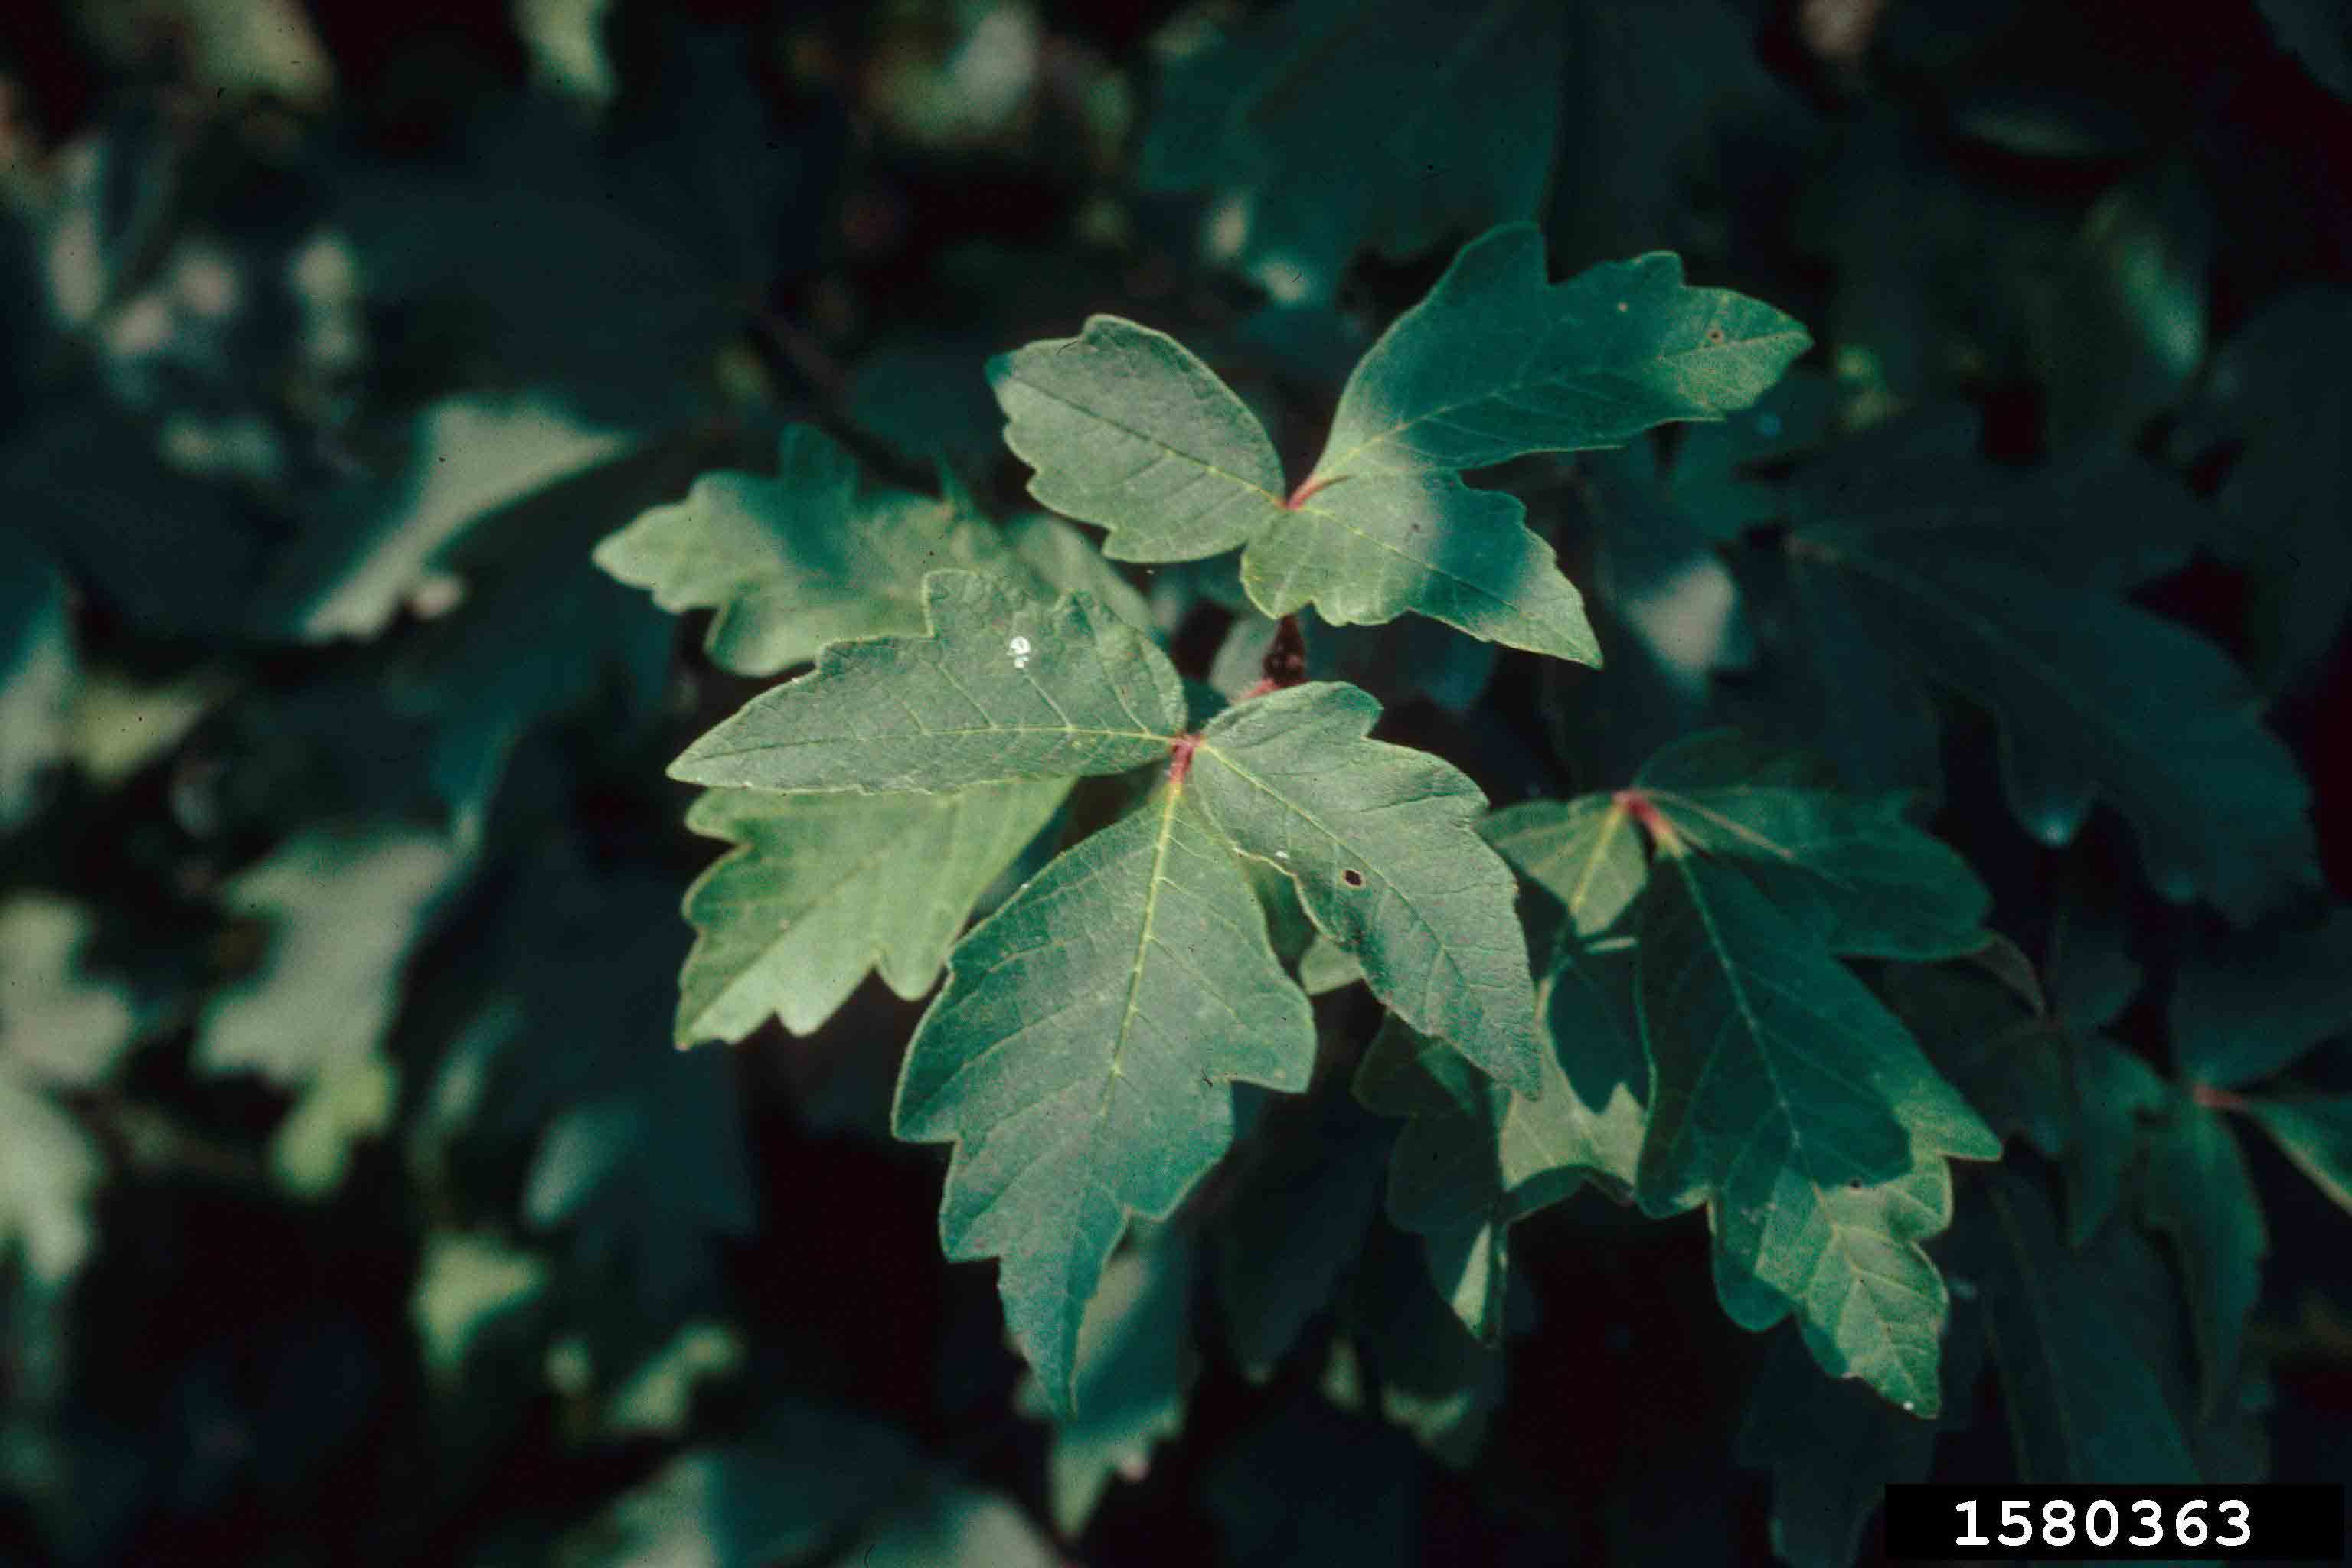 Paperbark maple trifoliate leaves, with three coarsely toothed leaflets